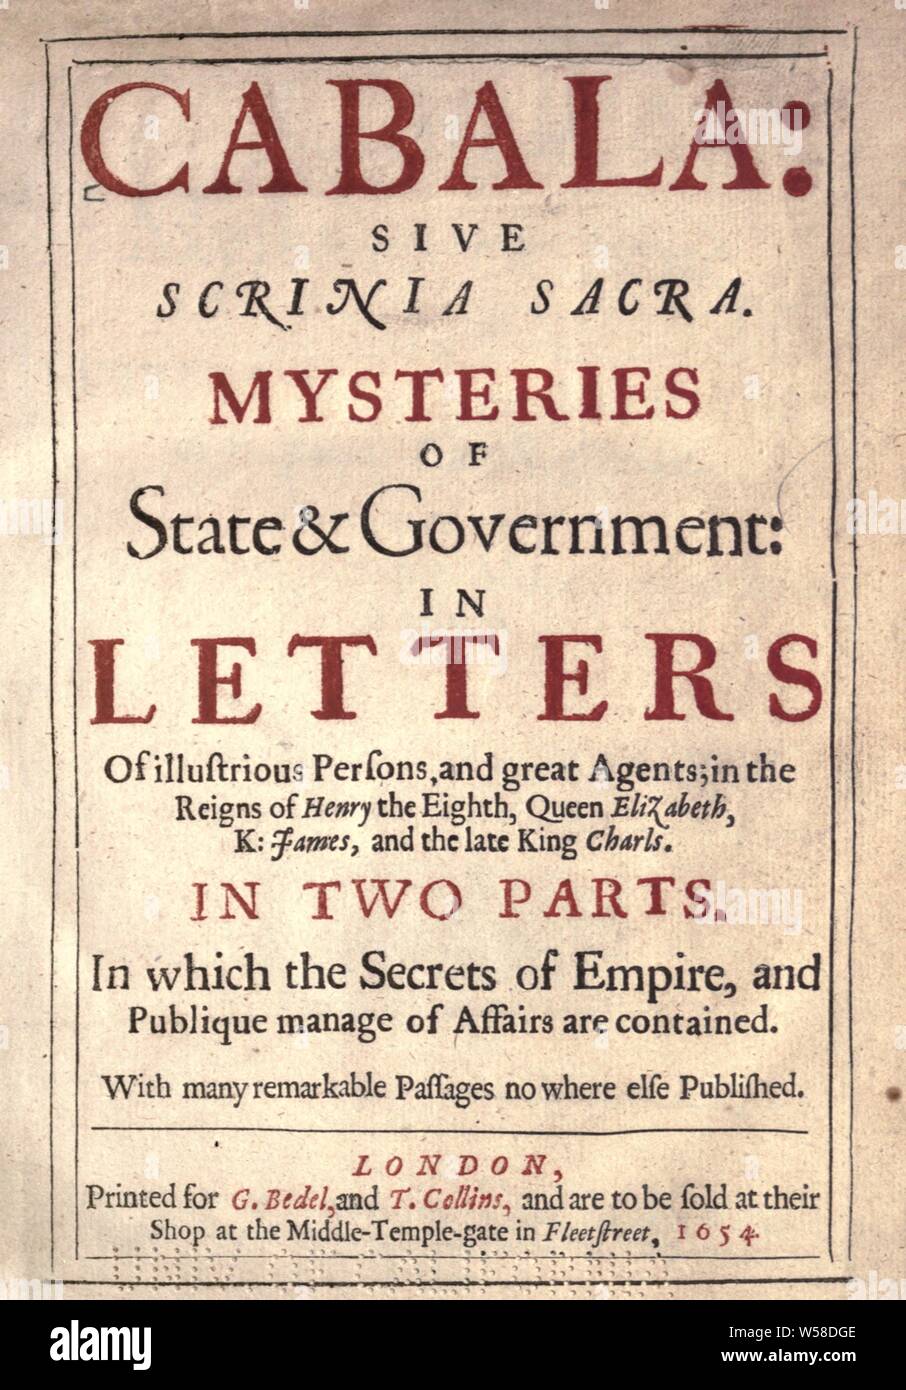 Cabala : sive scrinia sacra : Mysteries of state and government in letters of illustrious persons and great agents in the reigns of Henry the Eighth, Queen Elizabeth, K: James, and the late King Charls : In two parts, in which the secrets of empire and public manage of affairs are contained : With many remarkable passages no where else published Stock Photo